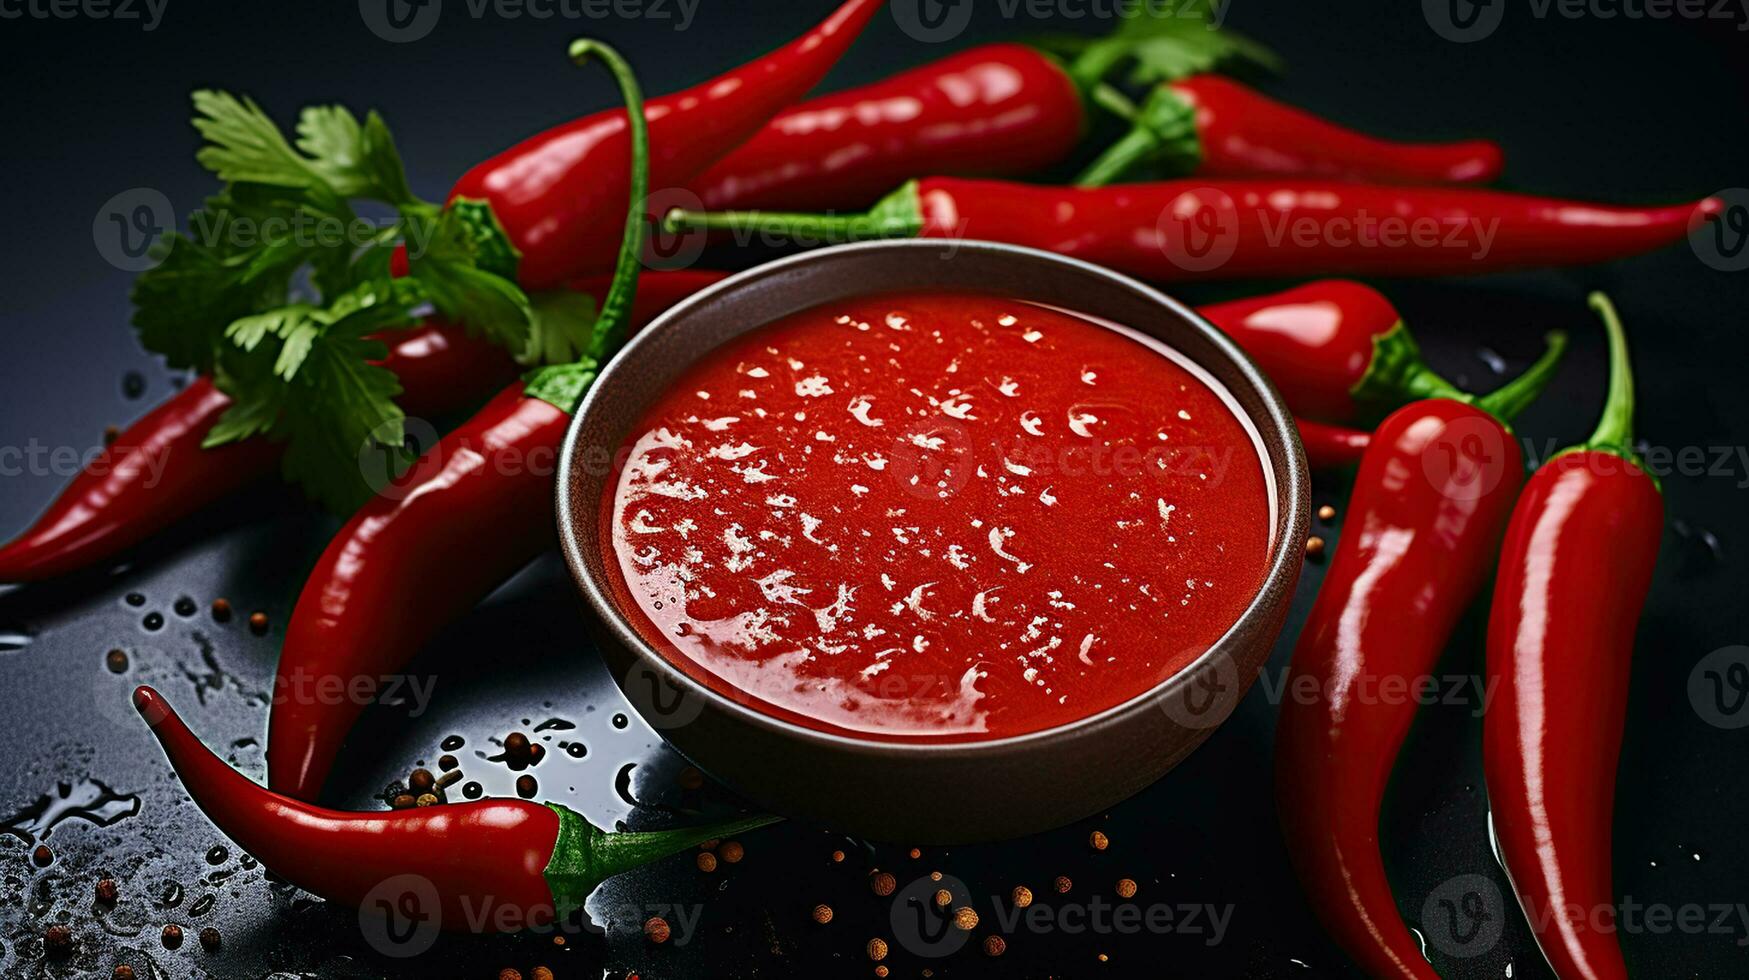 Bitter and spicy red pepper sauce. Red hot pepper and seasoning photo